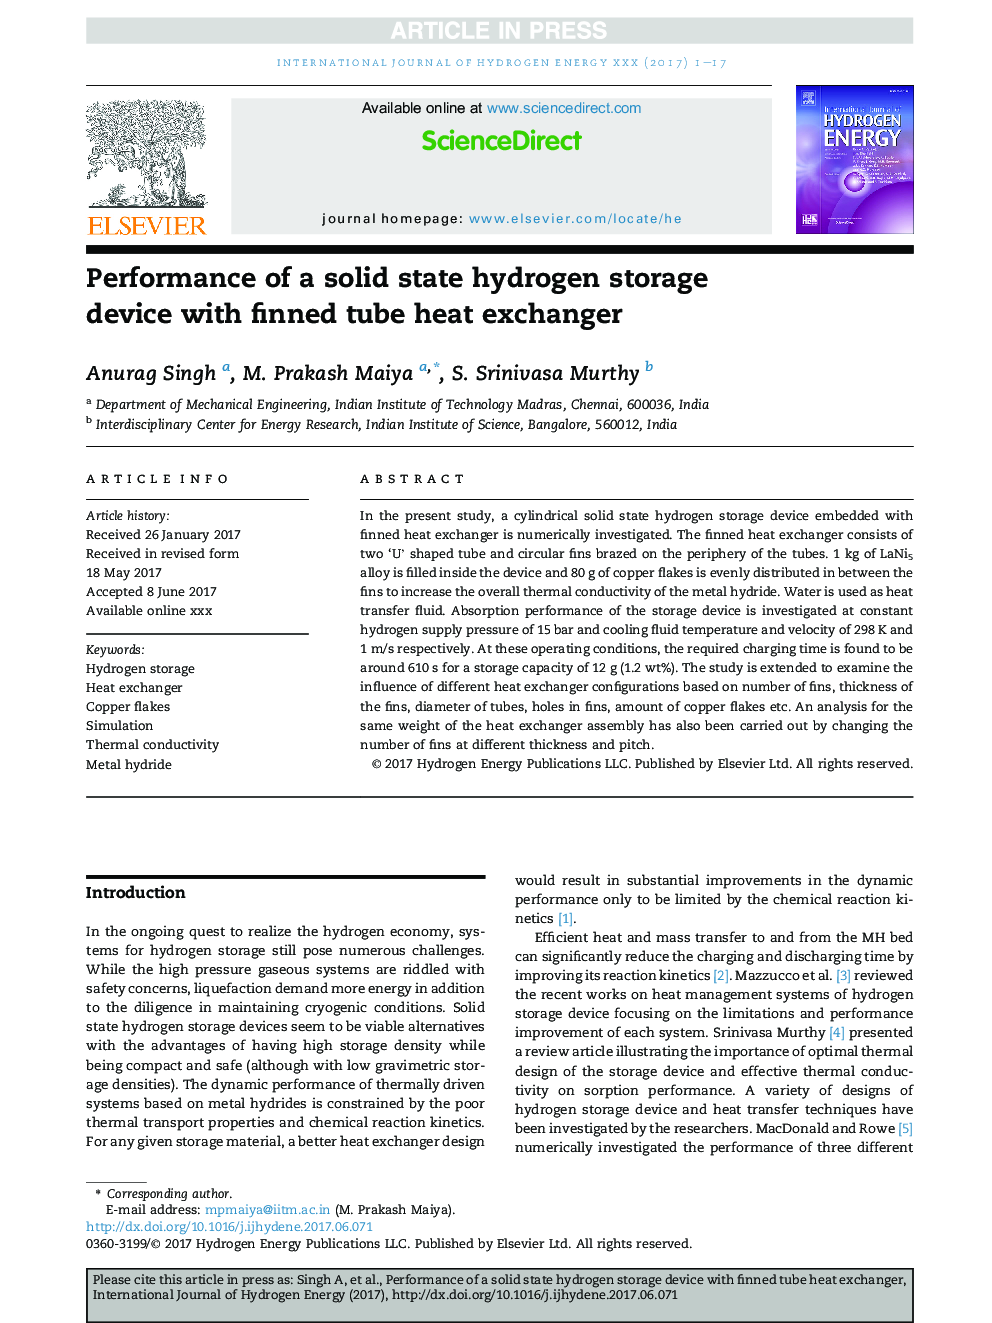 Performance of a solid state hydrogen storage device with finned tube heat exchanger